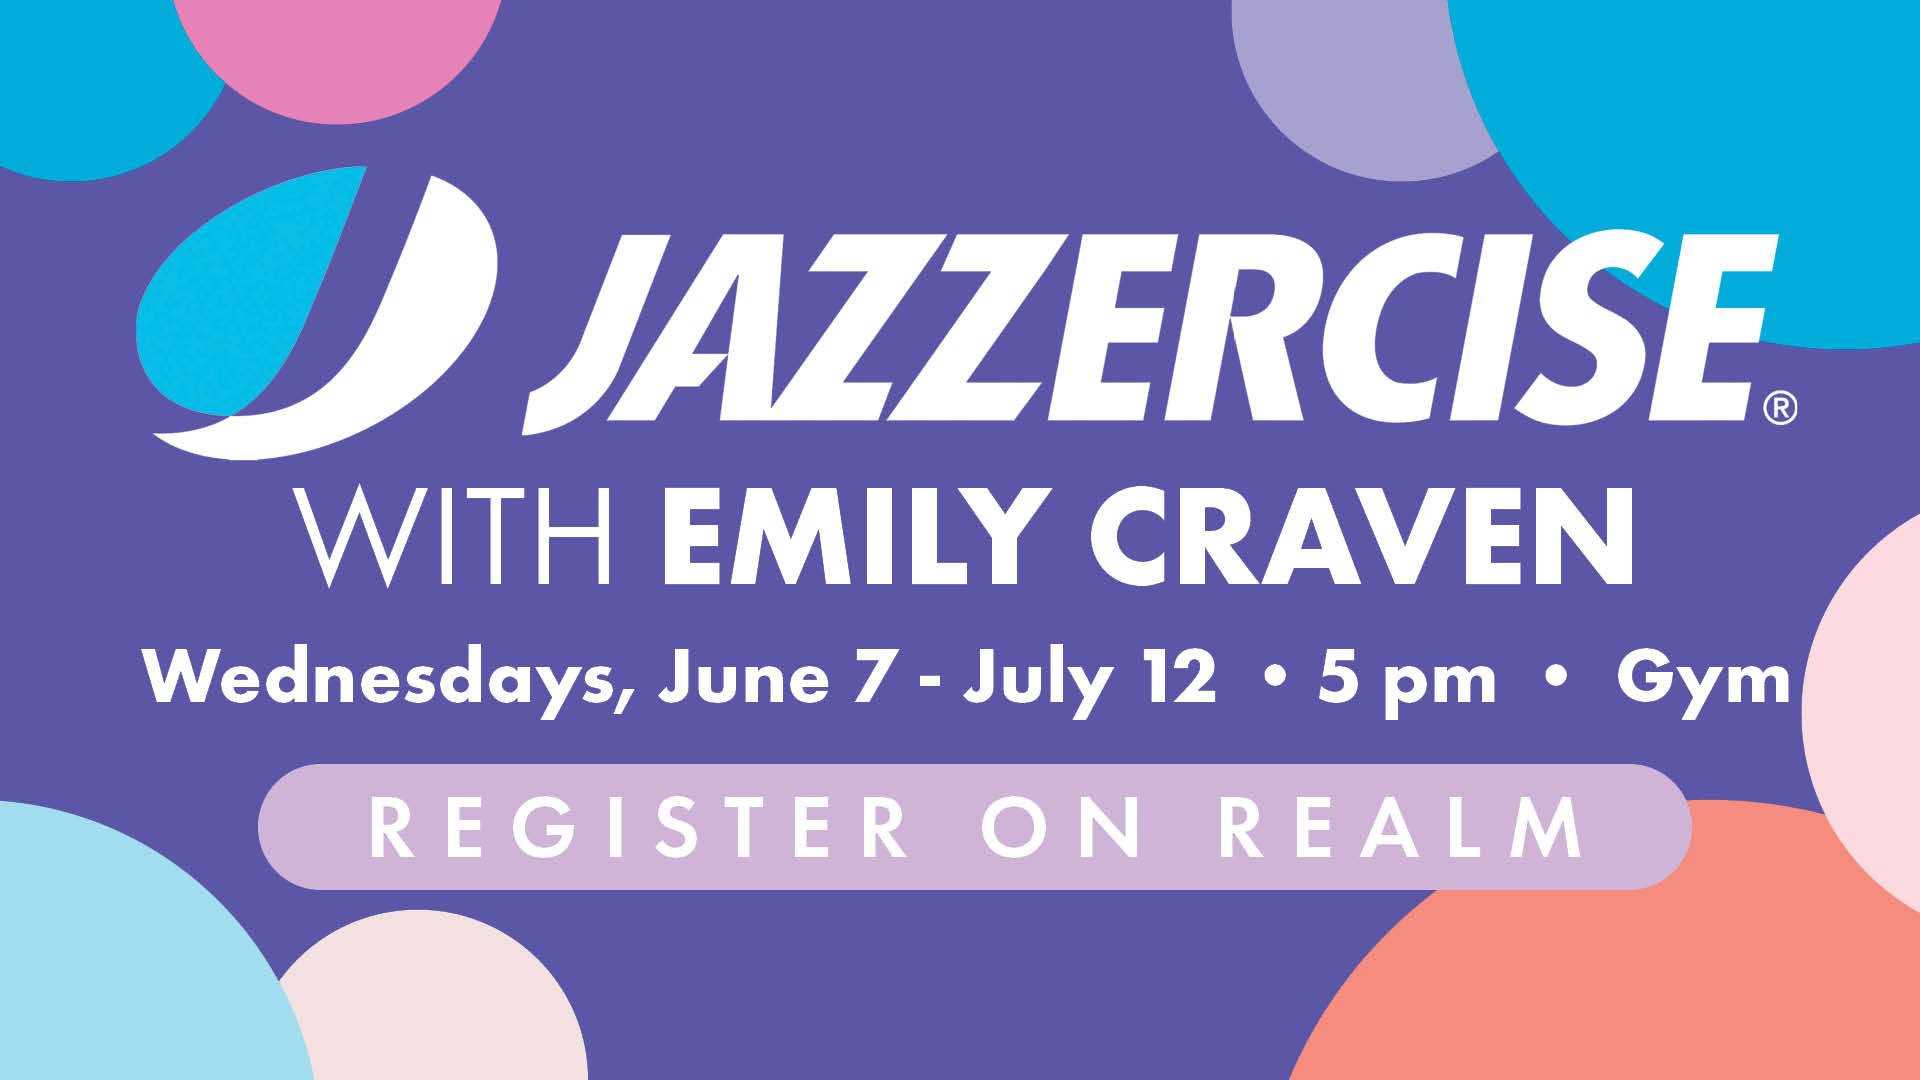 Jazzercise with Emily Craven — WHPC